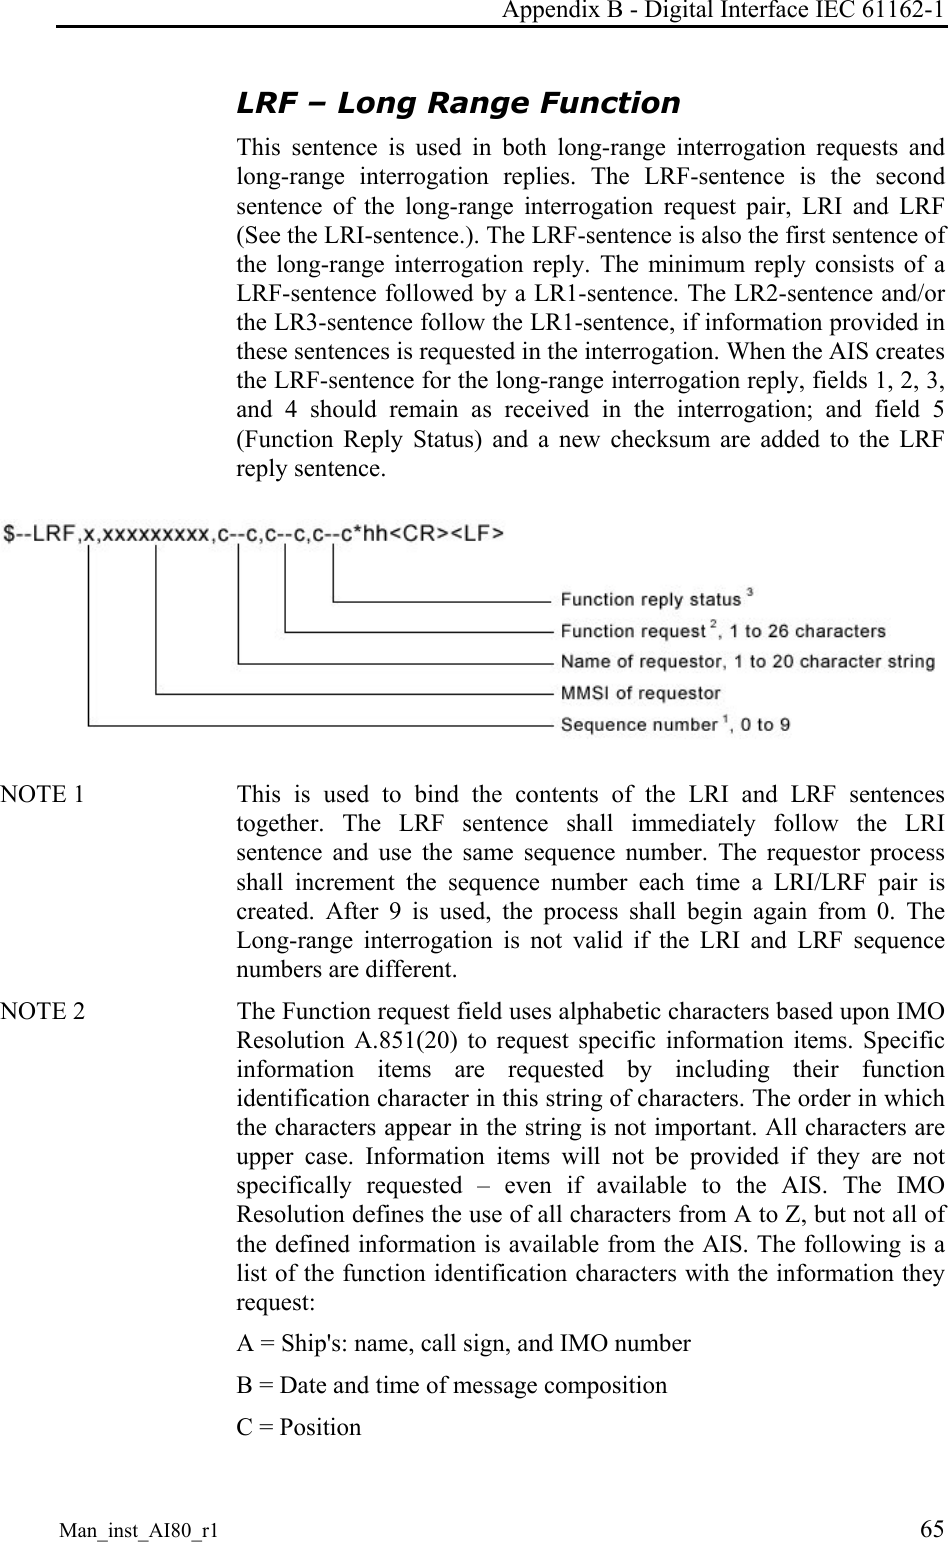 Appendix B - Digital Interface IEC 61162-1 Man_inst_AI80_r1 65 LRF – Long Range Function This sentence is used in both long-range interrogation requests and long-range interrogation replies. The LRF-sentence is the second sentence of the long-range interrogation request pair, LRI and LRF (See the LRI-sentence.). The LRF-sentence is also the first sentence of the long-range interrogation reply. The minimum reply consists of a LRF-sentence followed by a LR1-sentence. The LR2-sentence and/or the LR3-sentence follow the LR1-sentence, if information provided in these sentences is requested in the interrogation. When the AIS creates the LRF-sentence for the long-range interrogation reply, fields 1, 2, 3, and 4 should remain as received in the interrogation; and field 5 (Function Reply Status) and a new checksum are added to the LRF reply sentence.  NOTE 1   This is used to bind the contents of the LRI and LRF sentences together. The LRF sentence shall immediately follow the LRI sentence and use the same sequence number. The requestor process shall increment the sequence number each time a LRI/LRF pair is created. After 9 is used, the process shall begin again from 0. The Long-range interrogation is not valid if the LRI and LRF sequence numbers are different. NOTE 2   The Function request field uses alphabetic characters based upon IMO Resolution A.851(20) to request specific information items. Specific information items are requested by including their function identification character in this string of characters. The order in which the characters appear in the string is not important. All characters are upper case. Information items will not be provided if they are not specifically requested – even if available to the AIS. The IMO Resolution defines the use of all characters from A to Z, but not all of the defined information is available from the AIS. The following is a list of the function identification characters with the information they request: A = Ship&apos;s: name, call sign, and IMO number B = Date and time of message composition C = Position 